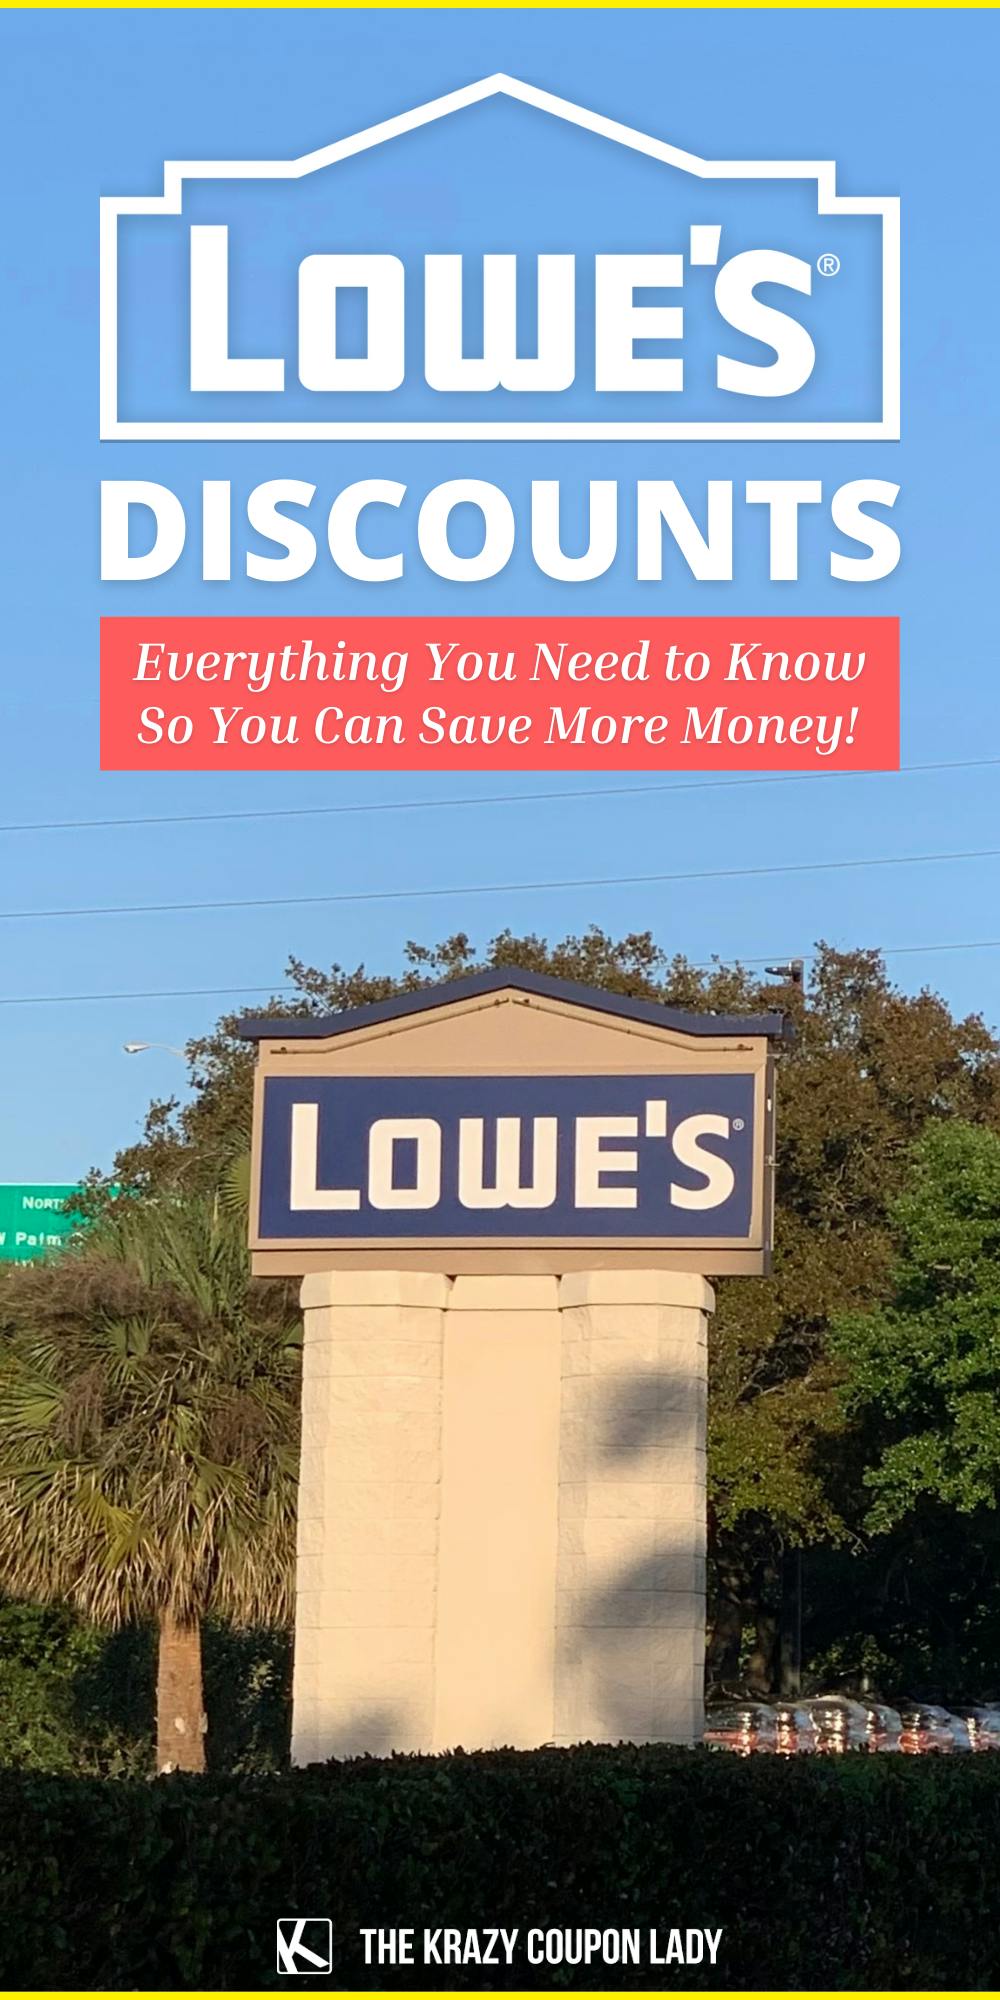 Lowe's Discounts: Everything You Need to Know